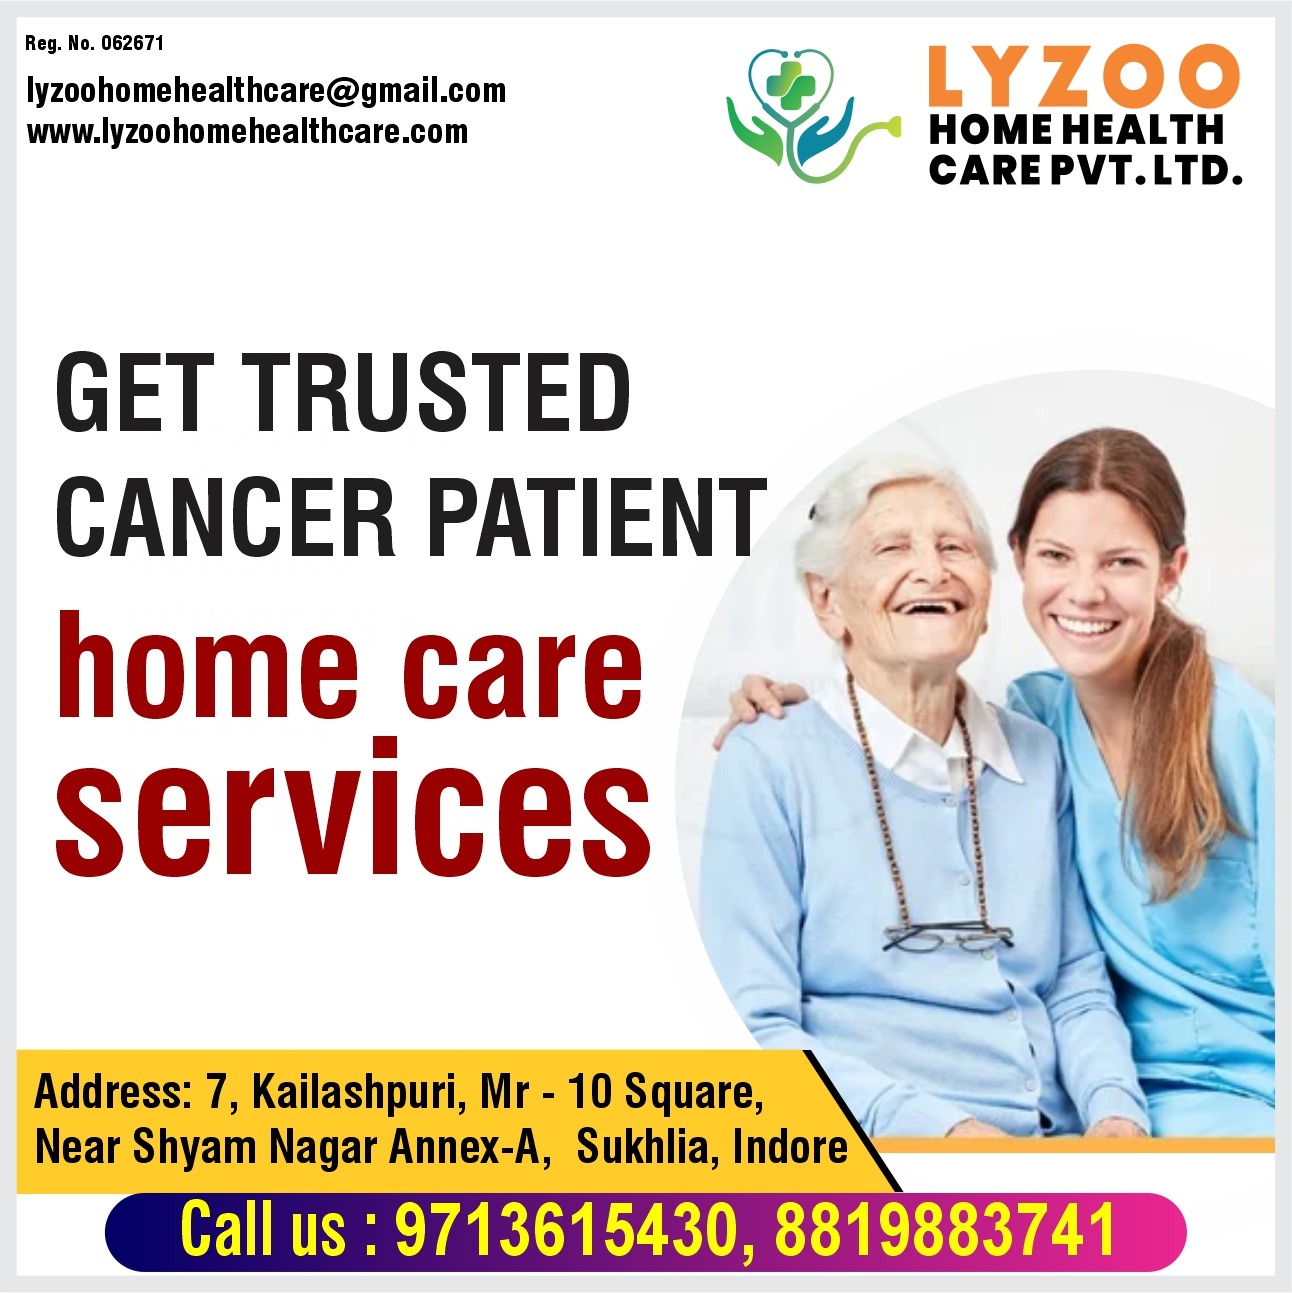 Home Health Care Services For Cancer Patients In Indore